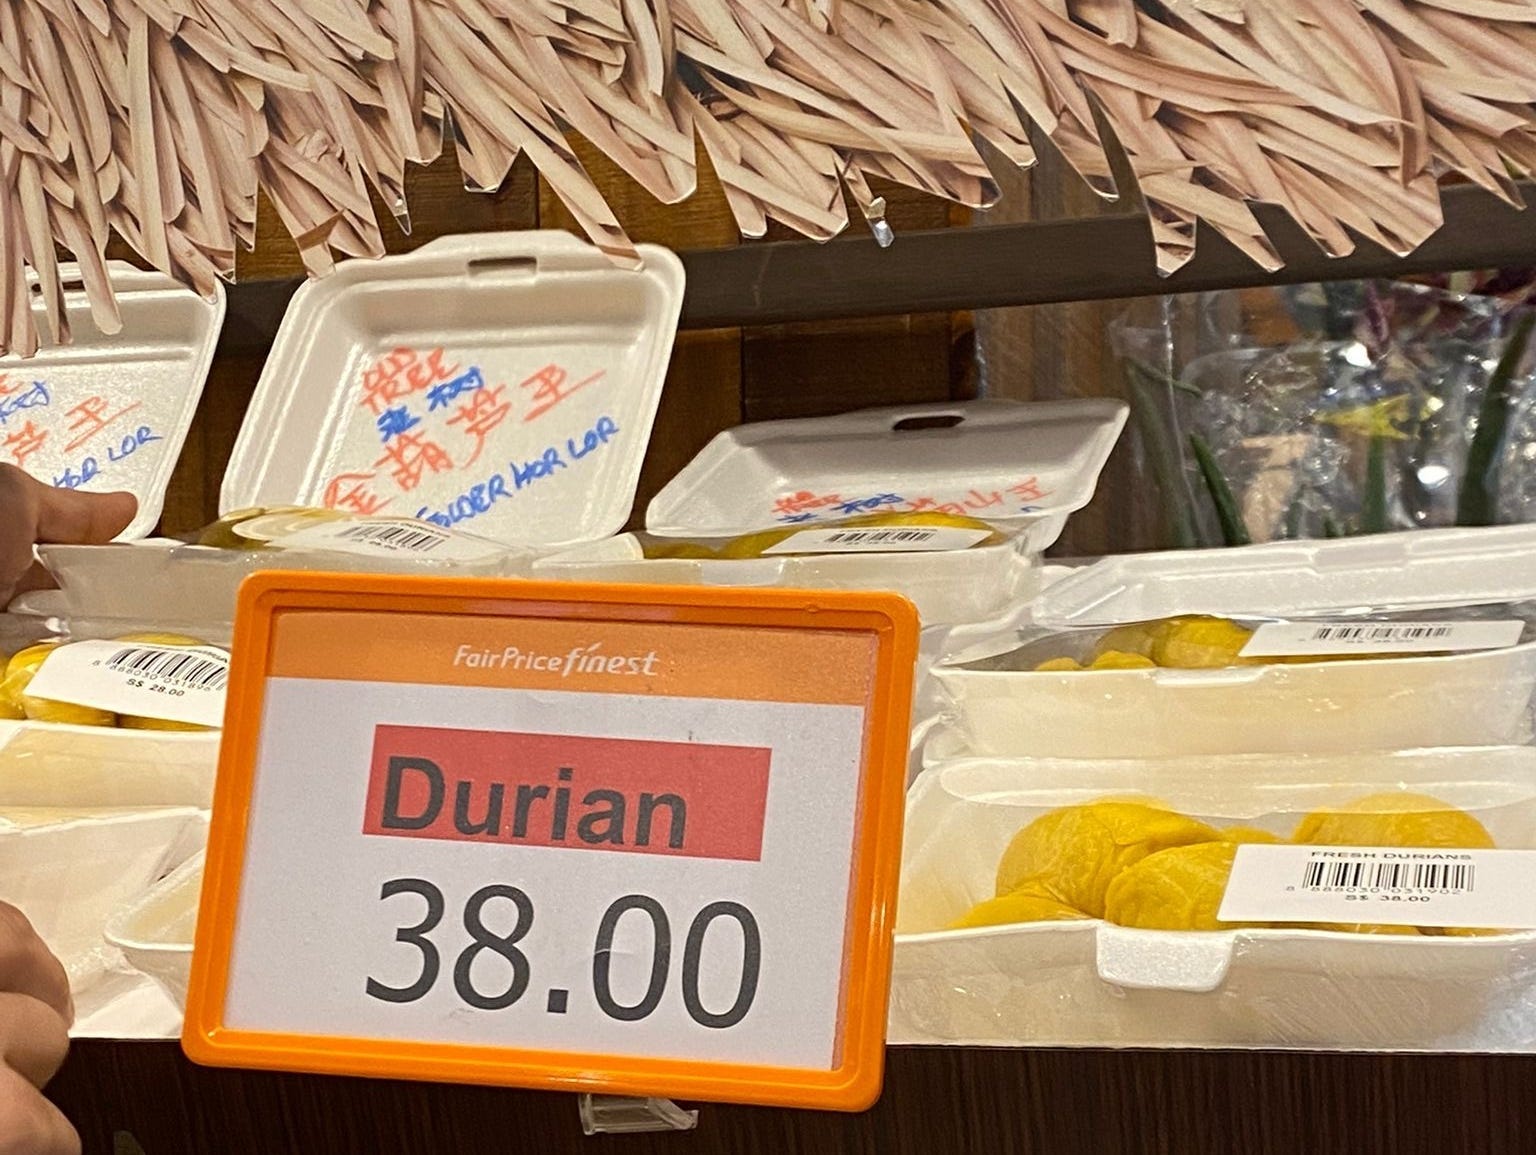 Durian at a singapore supermarket can fetch as much as $38 for a small packet.